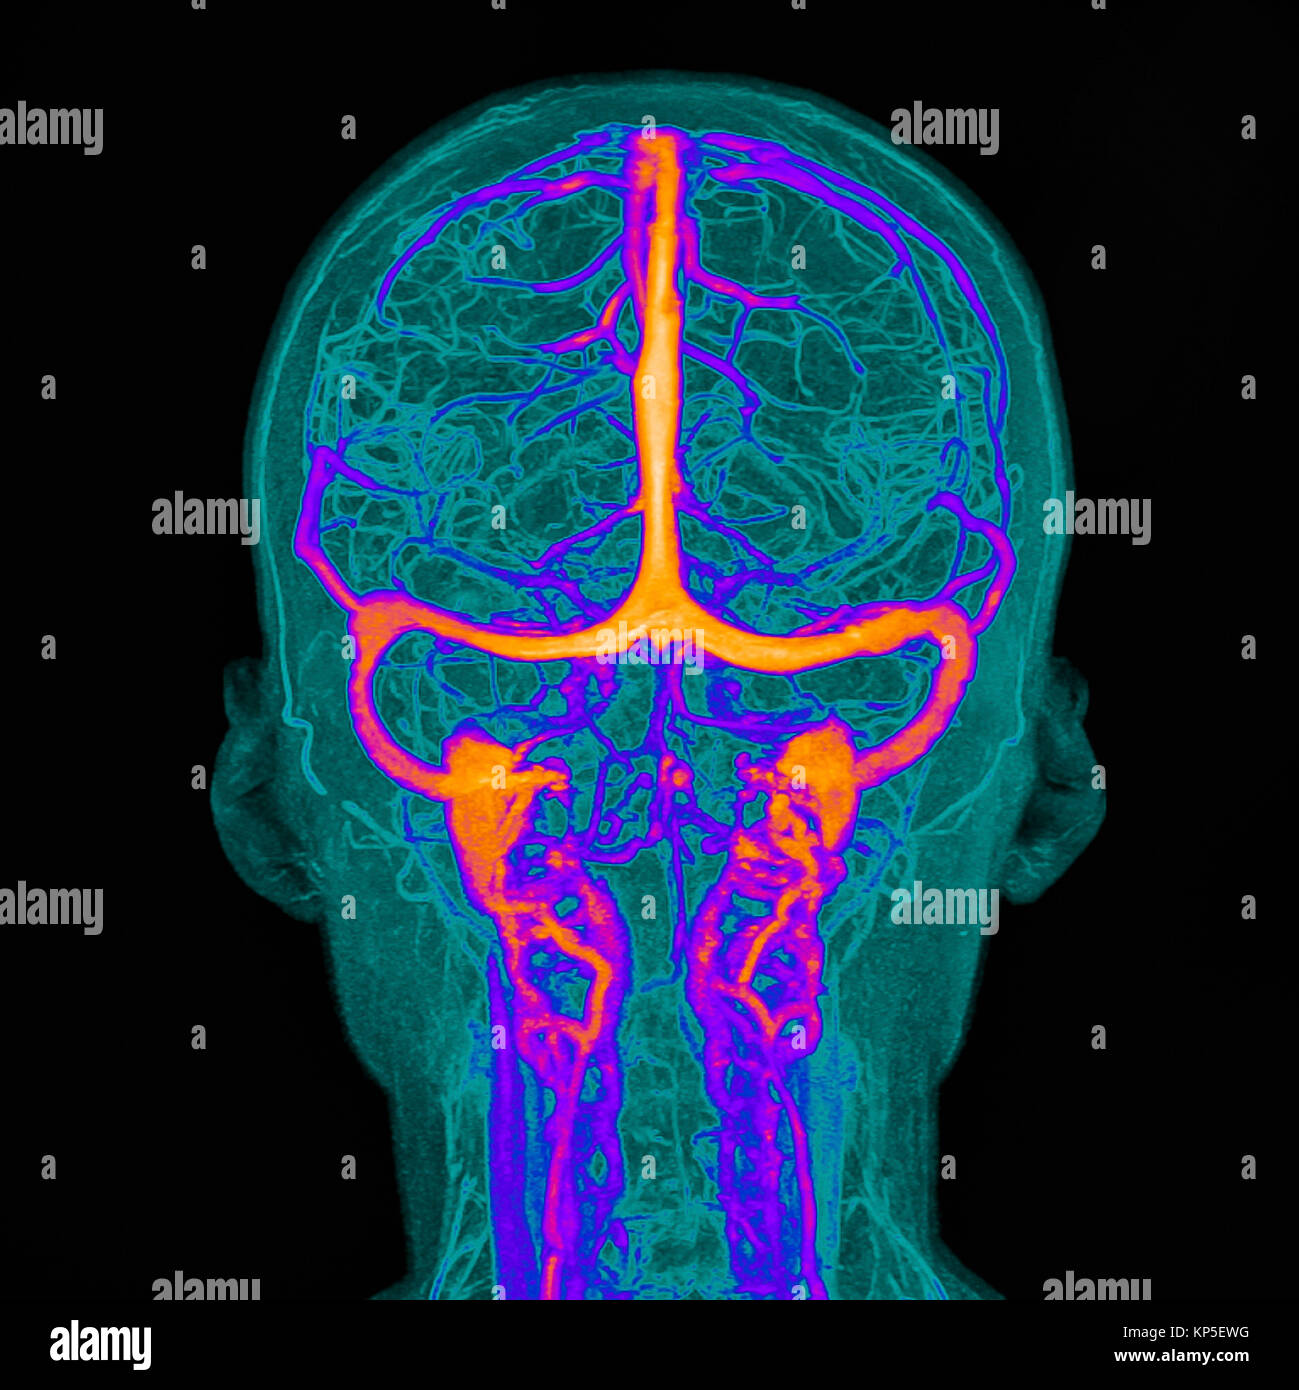 Intracranial blood vessels, Illustration based on a coloured magnetic resonance imaging (MRI) scan of a human brain and its intracranial blood vessels Stock Photo